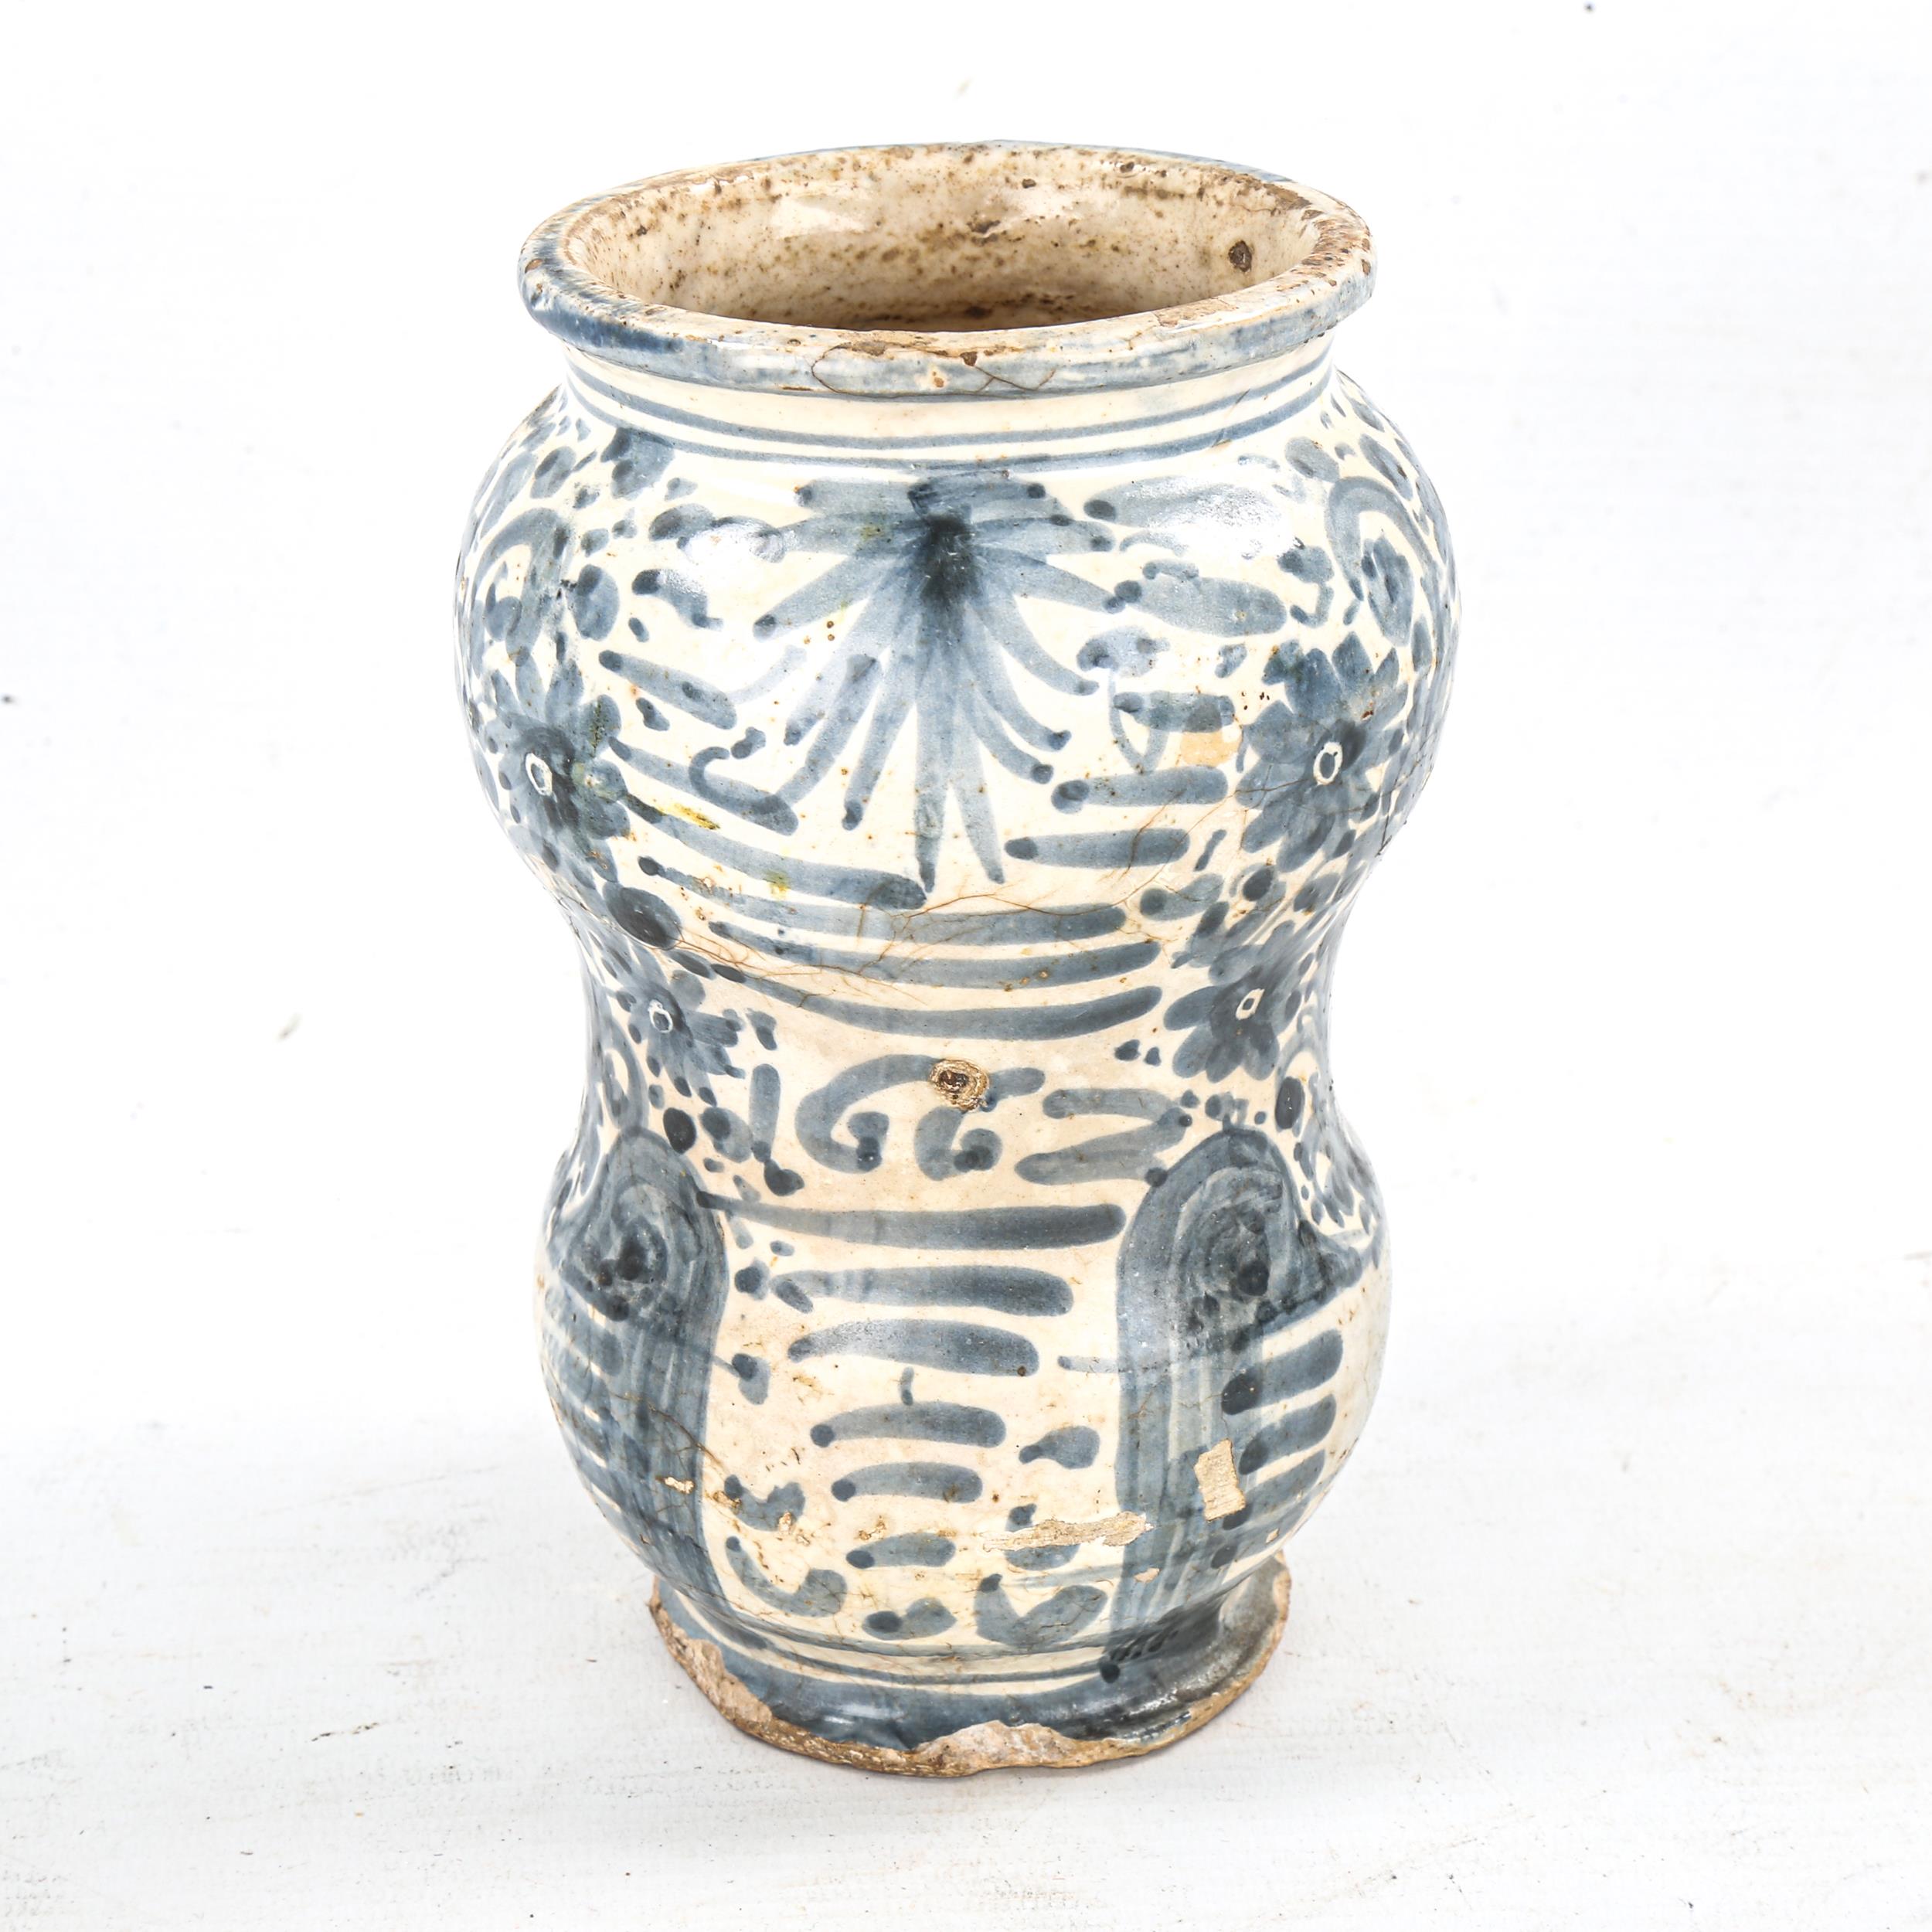 Antique Italian tin-glazed pottery Albarella jar, hand painted decoration and text, height 16cm - Image 2 of 3